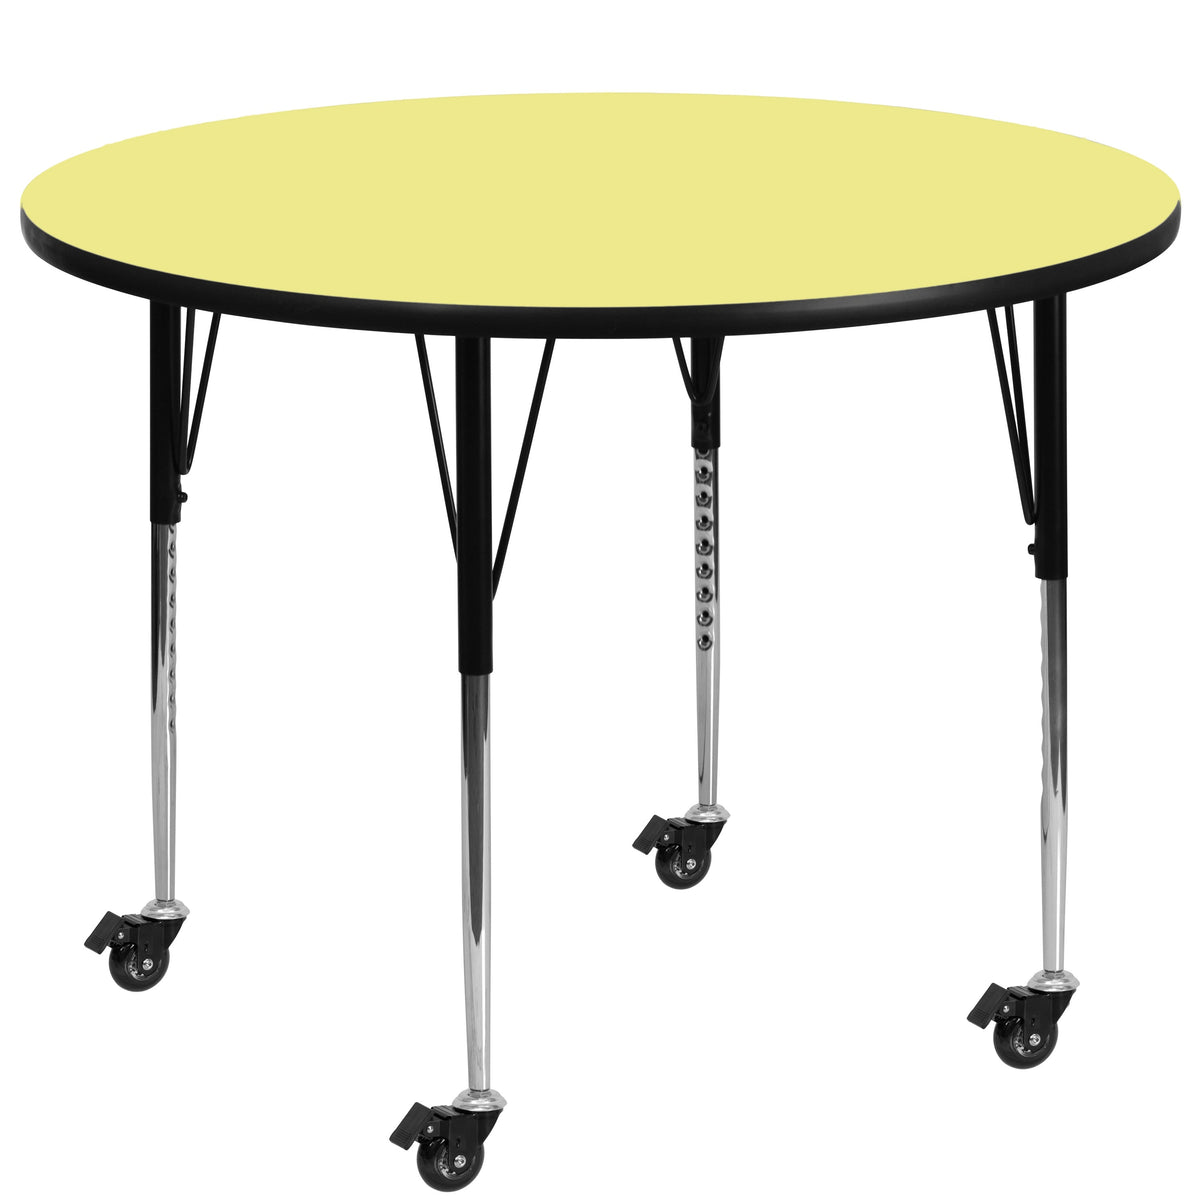 Yellow |#| Mobile 60inch Round Yellow Thermal Laminate Activity Table - Height Adjustable Legs